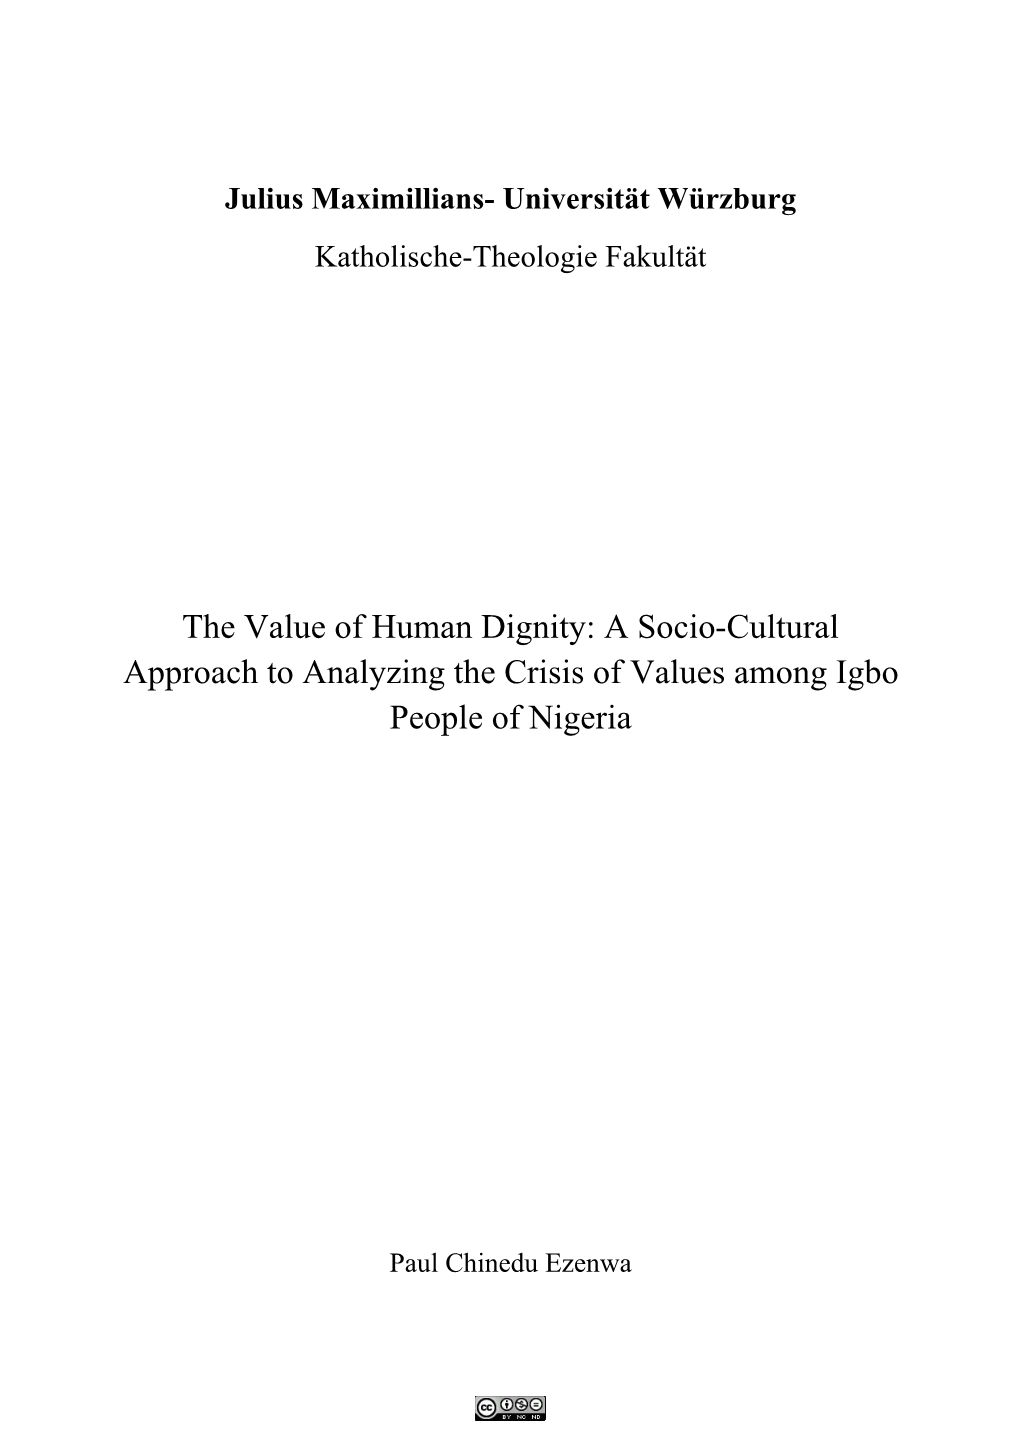 The Value of Human Dignity: a Socio-Cultural Approach to Analyzing the Crisis of Values Among Igbo People of Nigeria